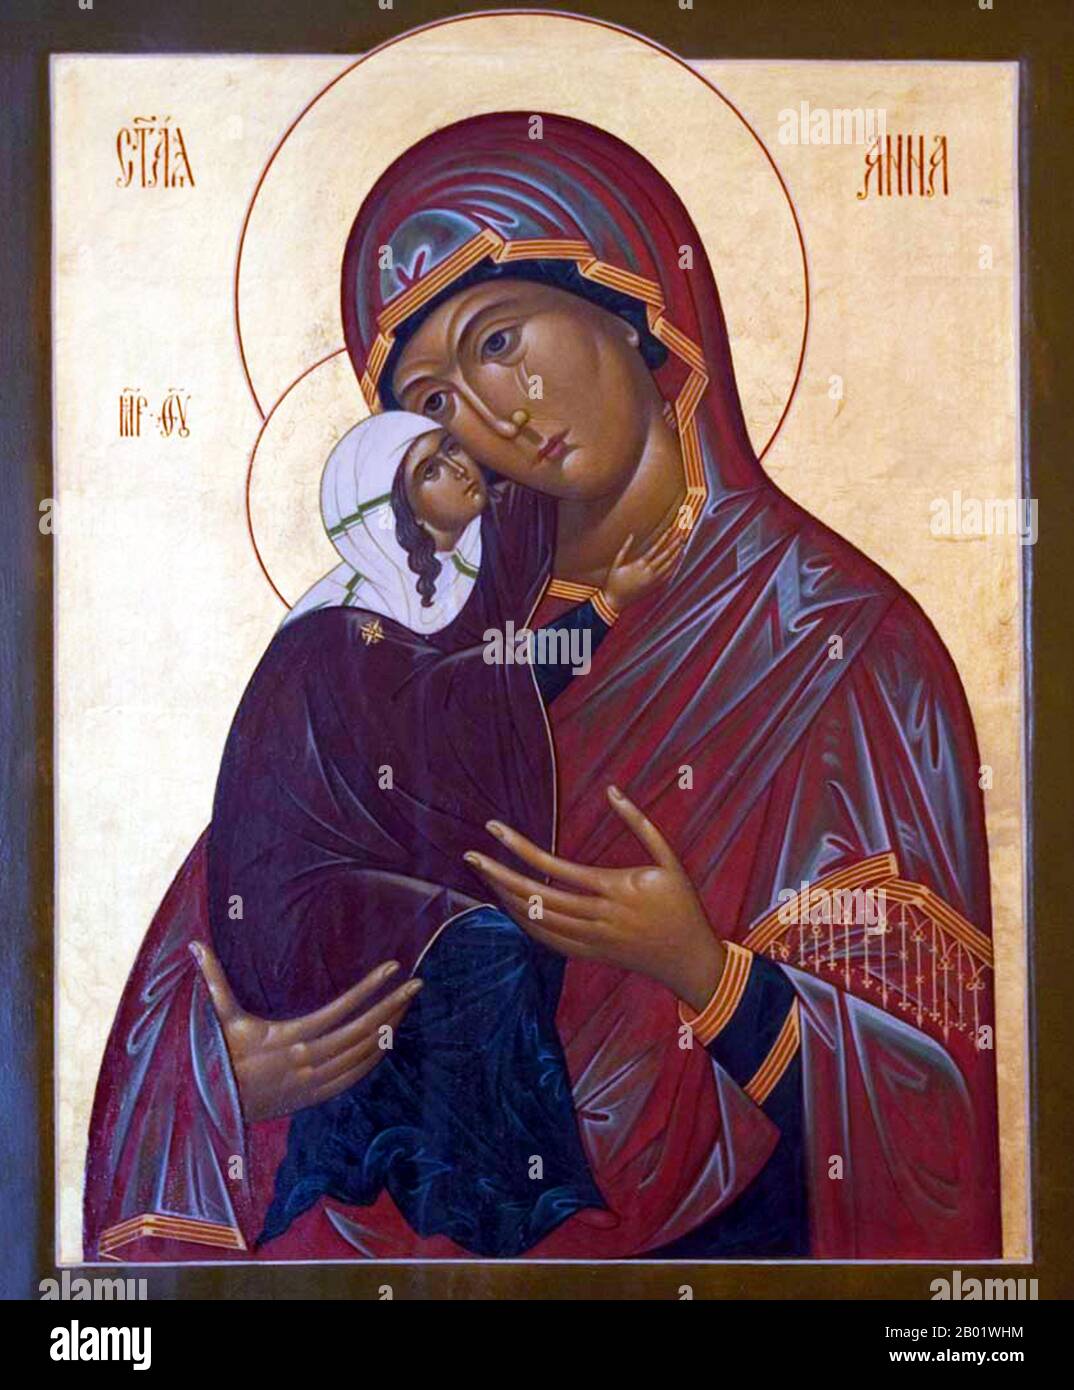 USA: Myrrh-streaming icon of St. Anna, mother of the Holy Virgin Mary, Russian Orthodox Church of Our Lady of Joy of All Who Sorrow, Philadelphia.  Saint Anne (also Ann or Anna, from Hebrew Hannah, meaning 'favour' or 'grace') of David's house and line, was the mother of the Virgin Mary and grandmother of Jesus Christ according to Christian and Islamic tradition.  The English name Anne is derived from Greek rendering of her Hebrew name Hannah. Mary's mother is not named in the canonical gospels or the Qur'an, and her name and that of her husband Joachim come only from New Testament apocrypha. Stock Photo